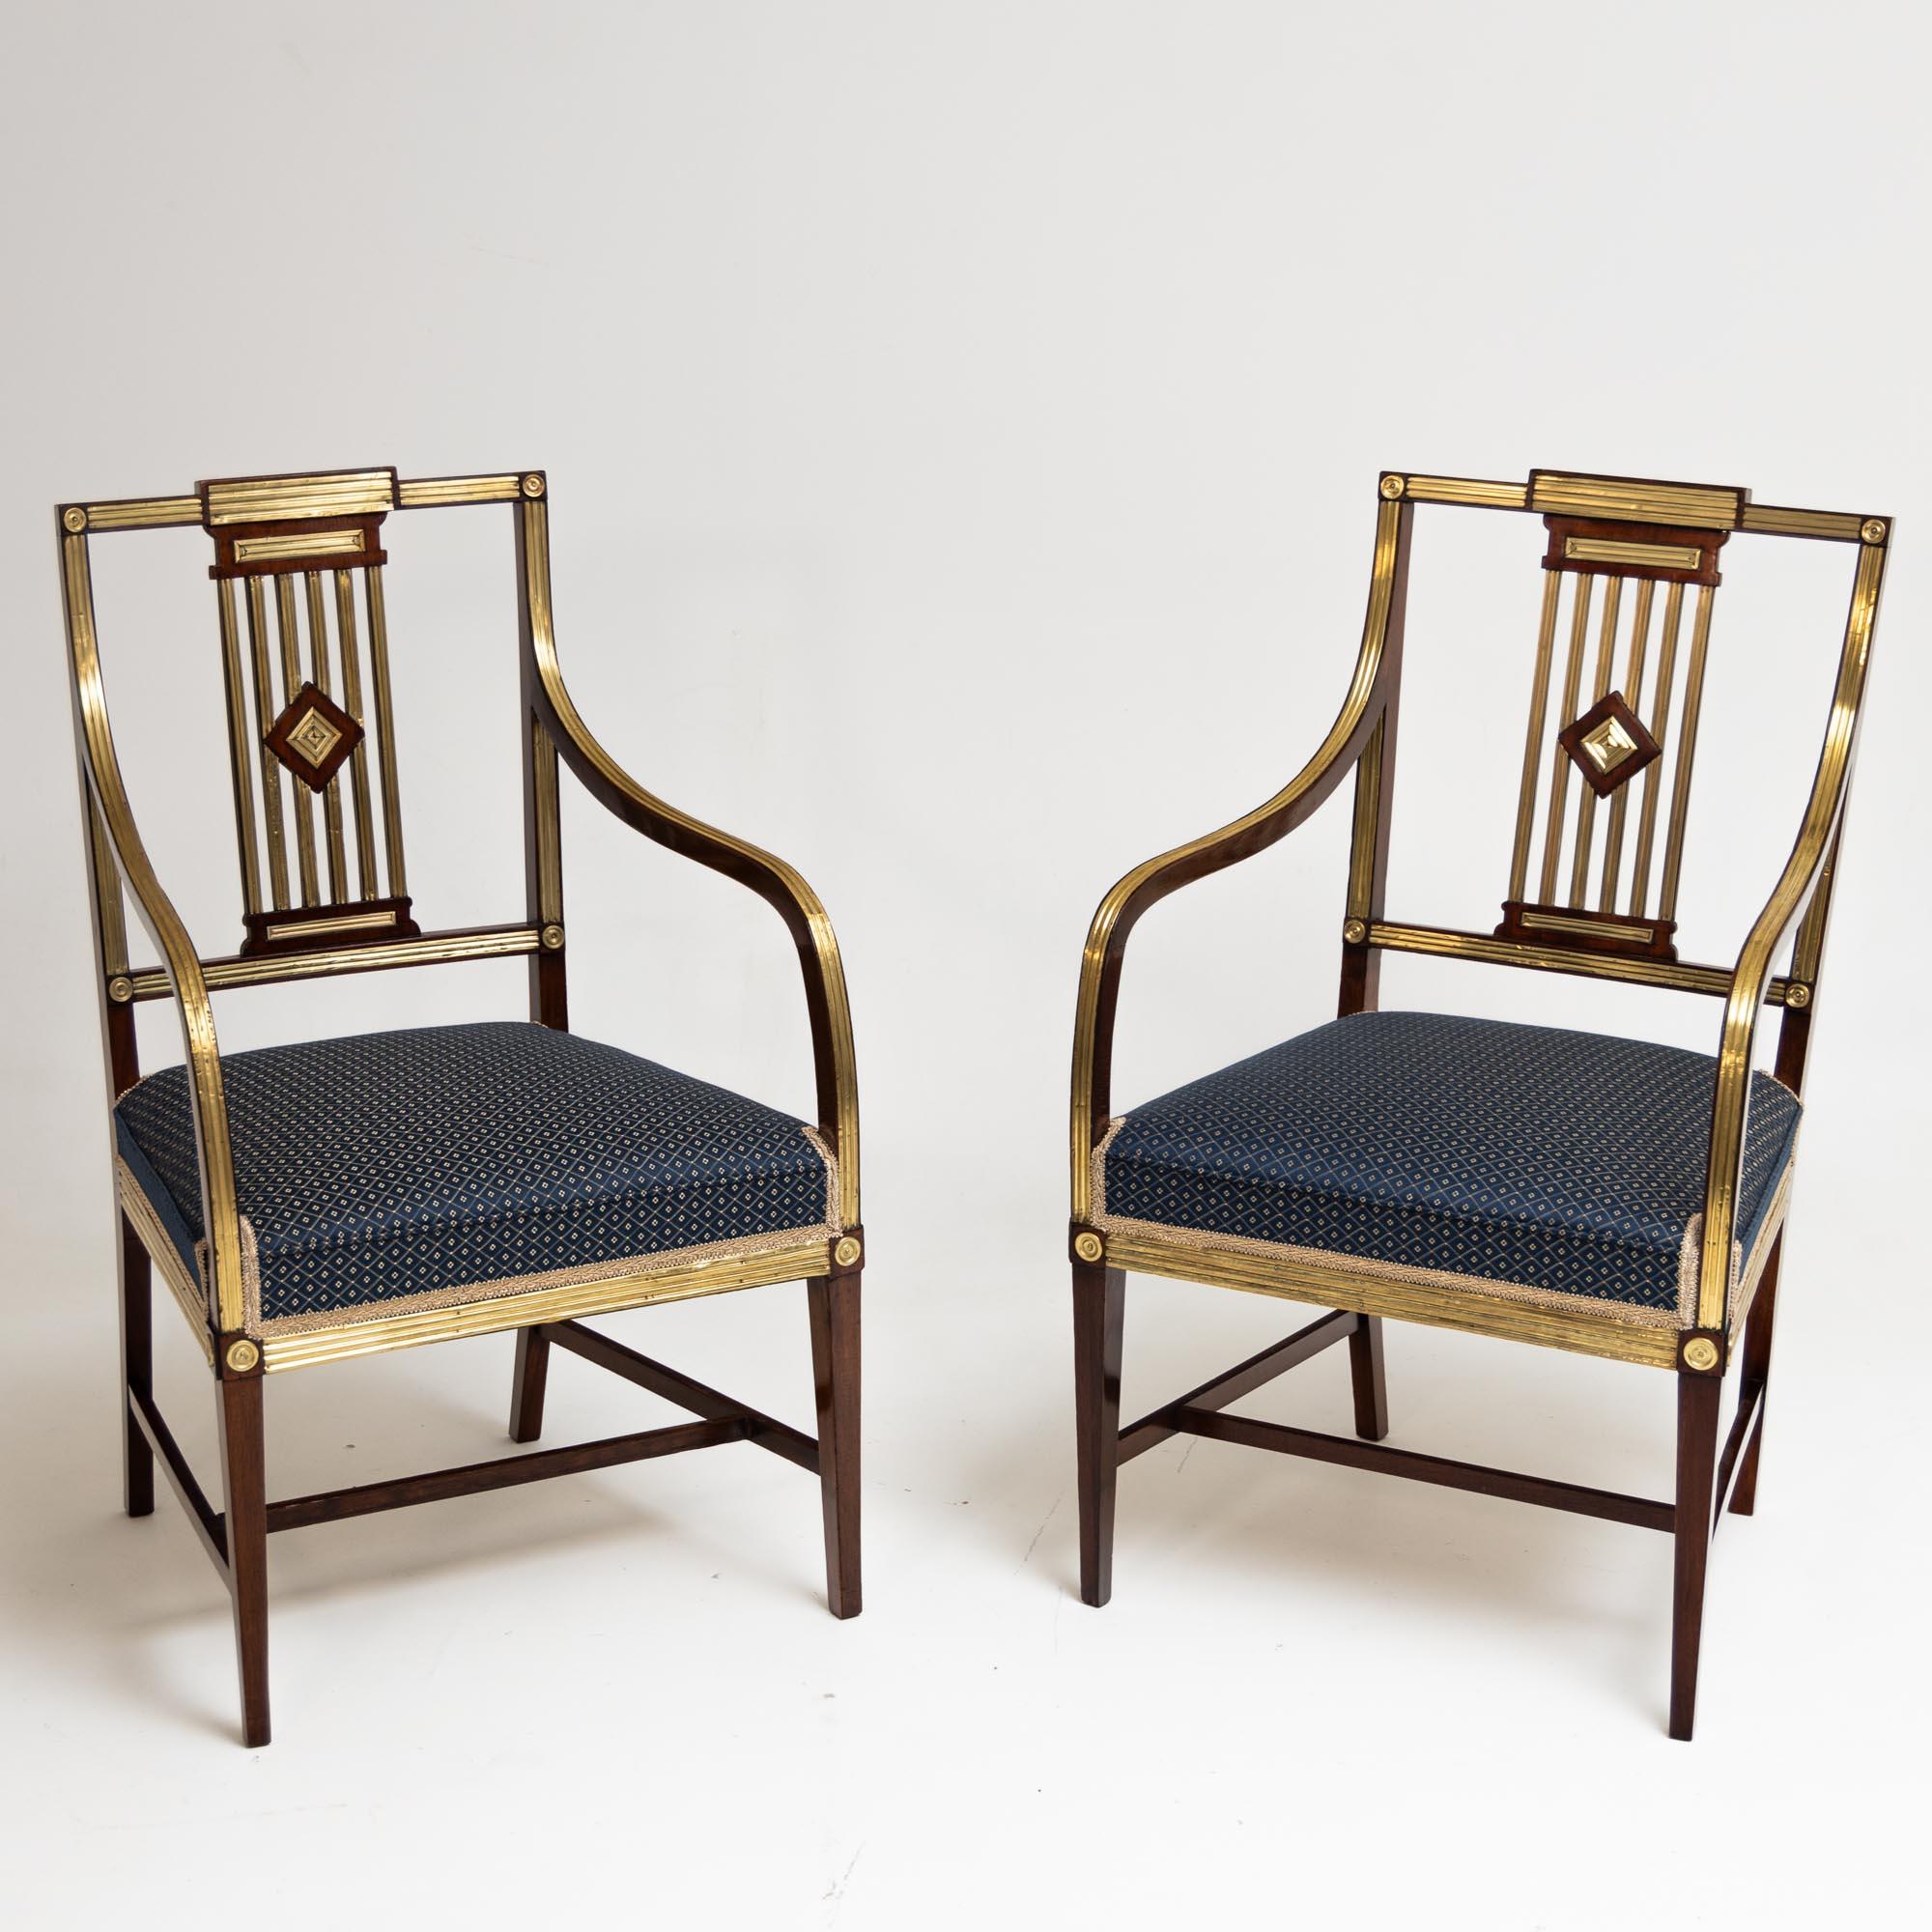 Pair of Neoclassical Dining Room Chairs, Brass, Baltic States, Late 18th Century For Sale